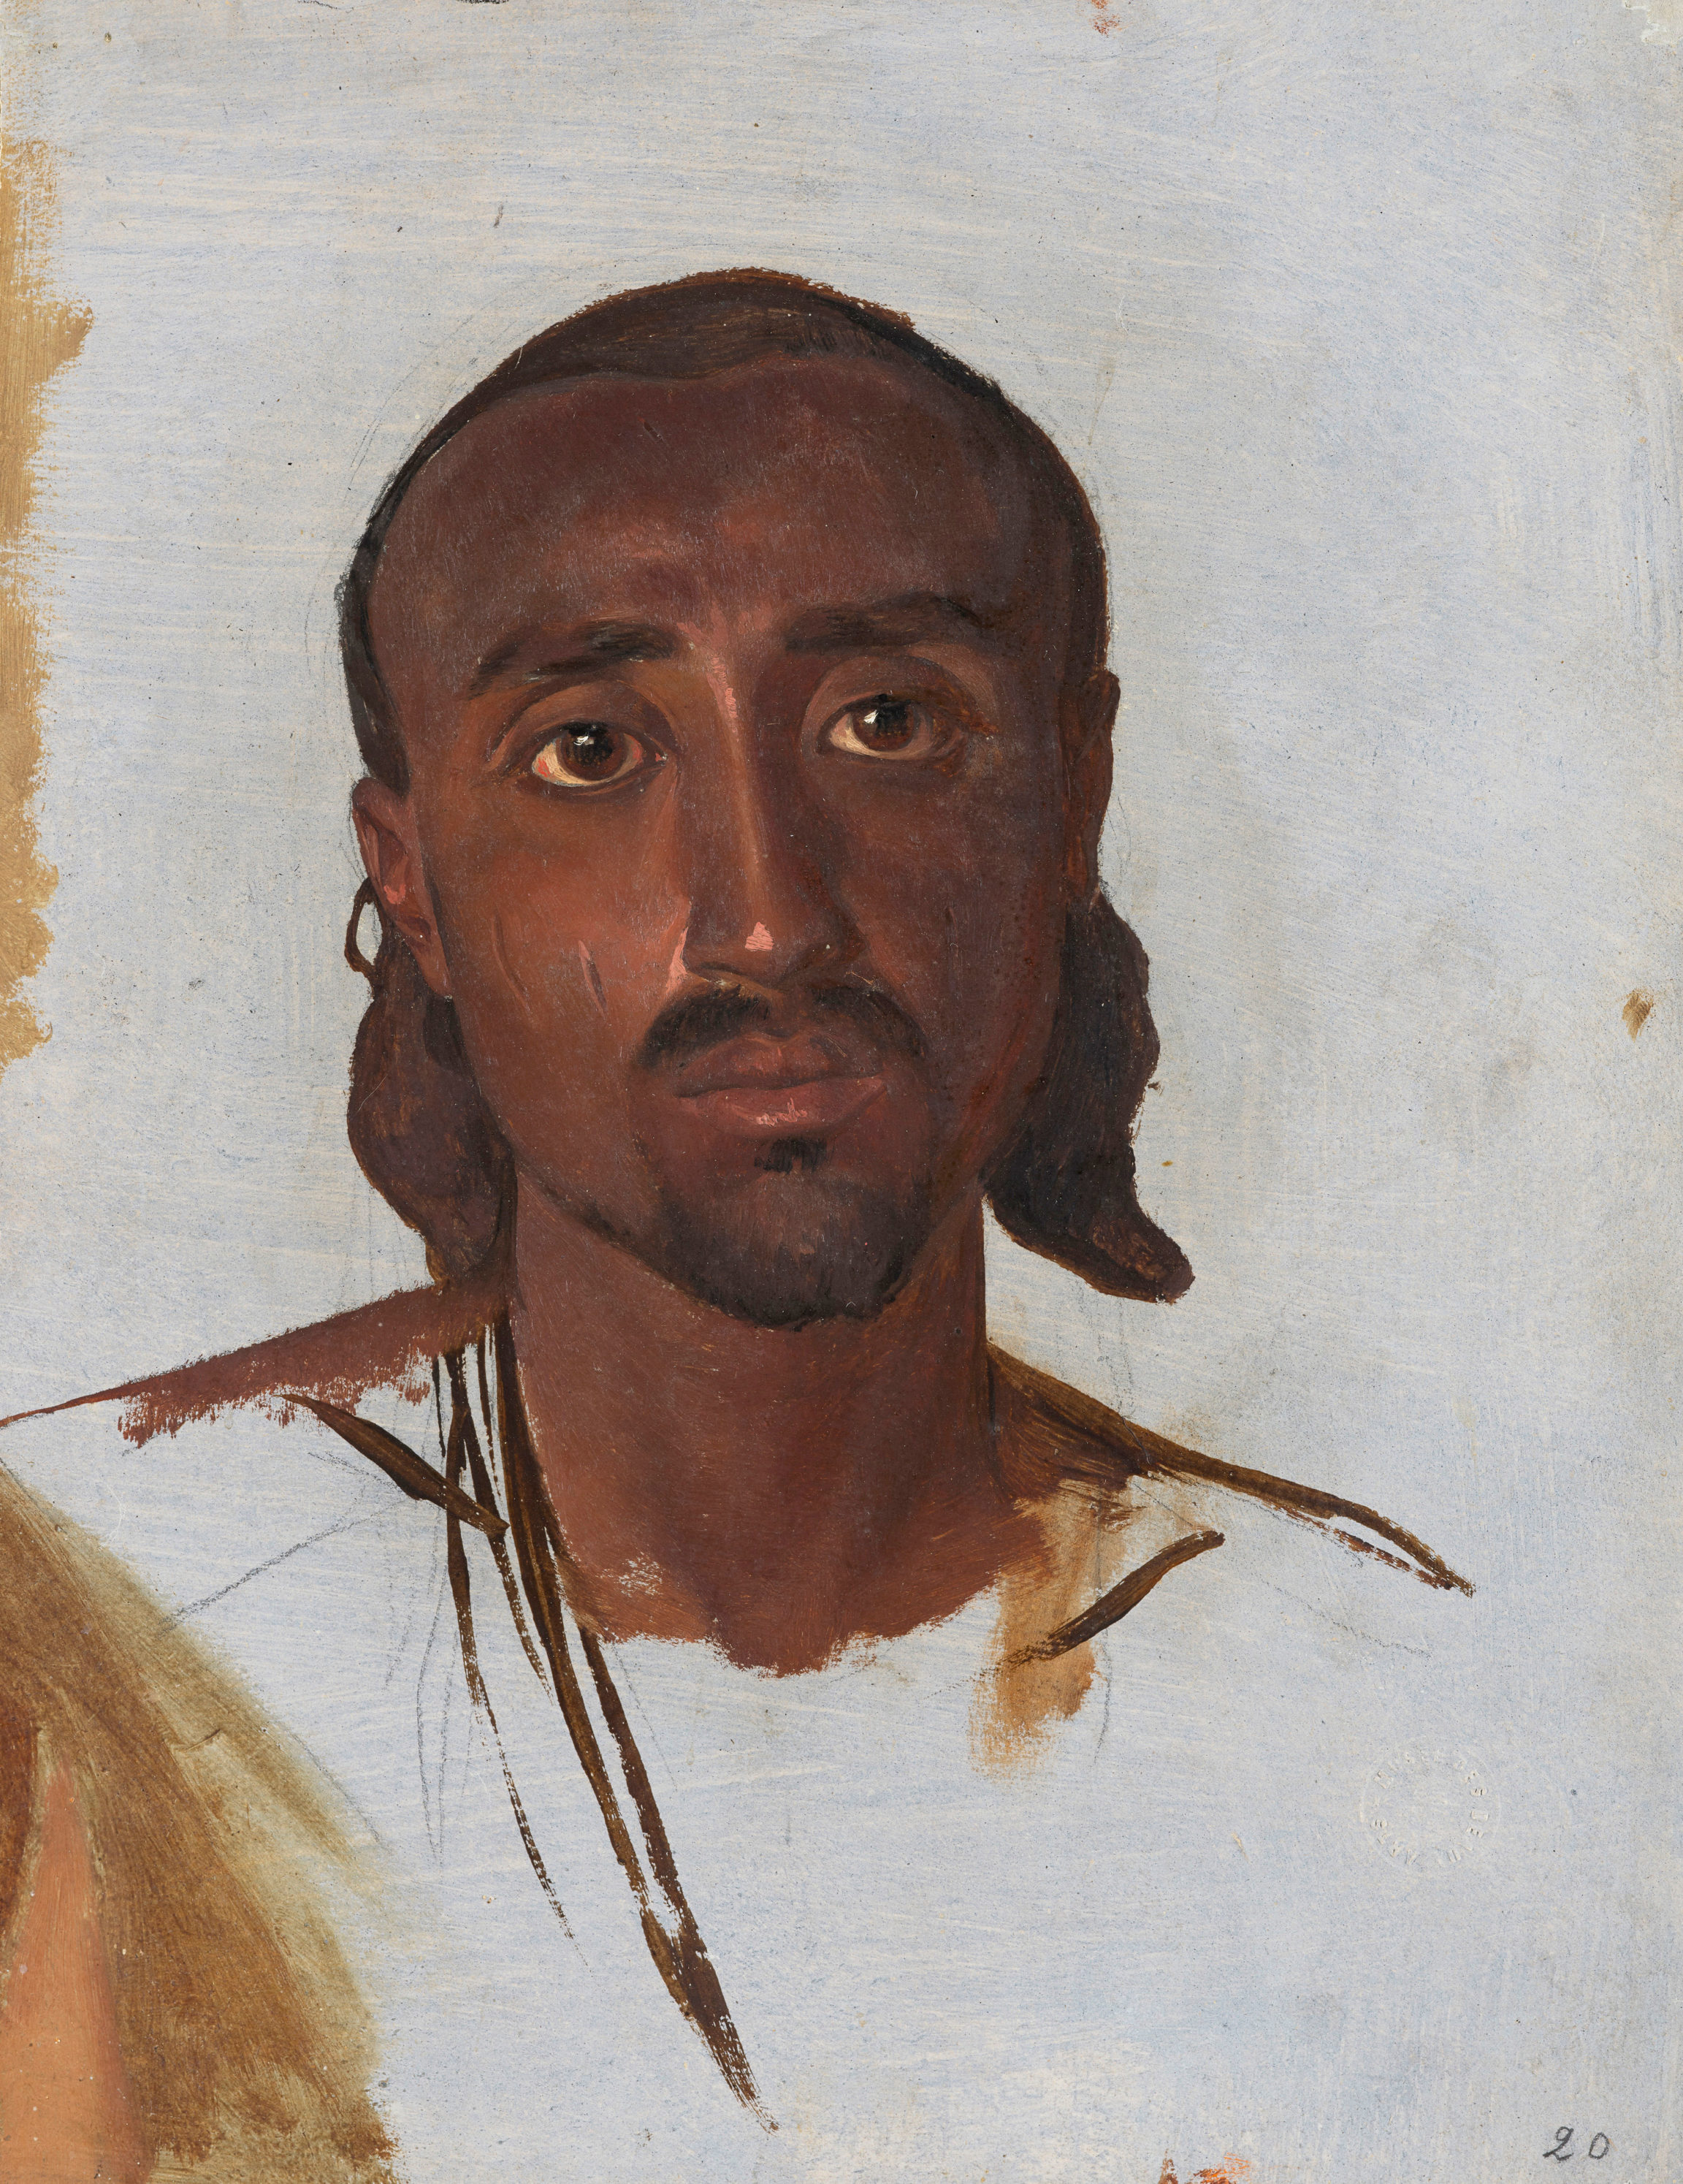 Charles Gleyre, Etude d’un Nubien (Study of a Nubian), between 1835 and 1837